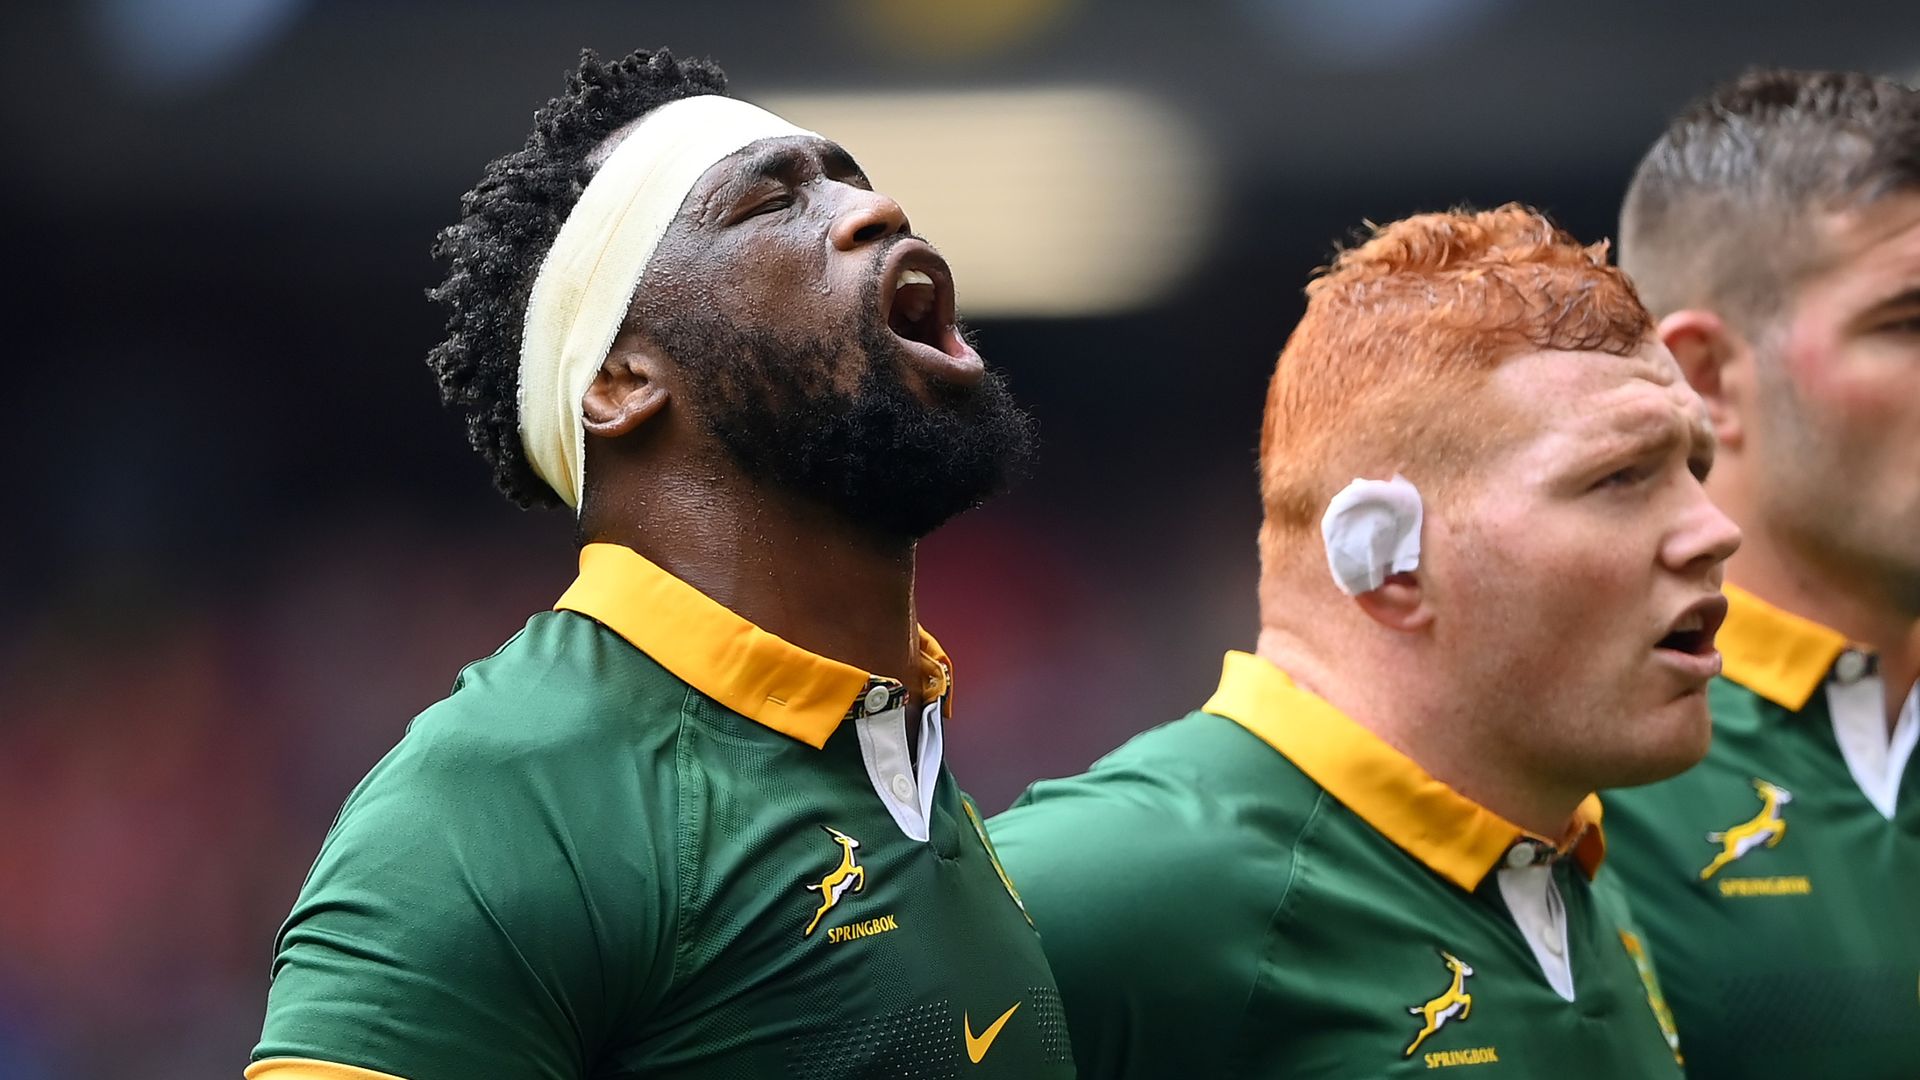 Kolisi: South Africa inspired by struggles of whole nation